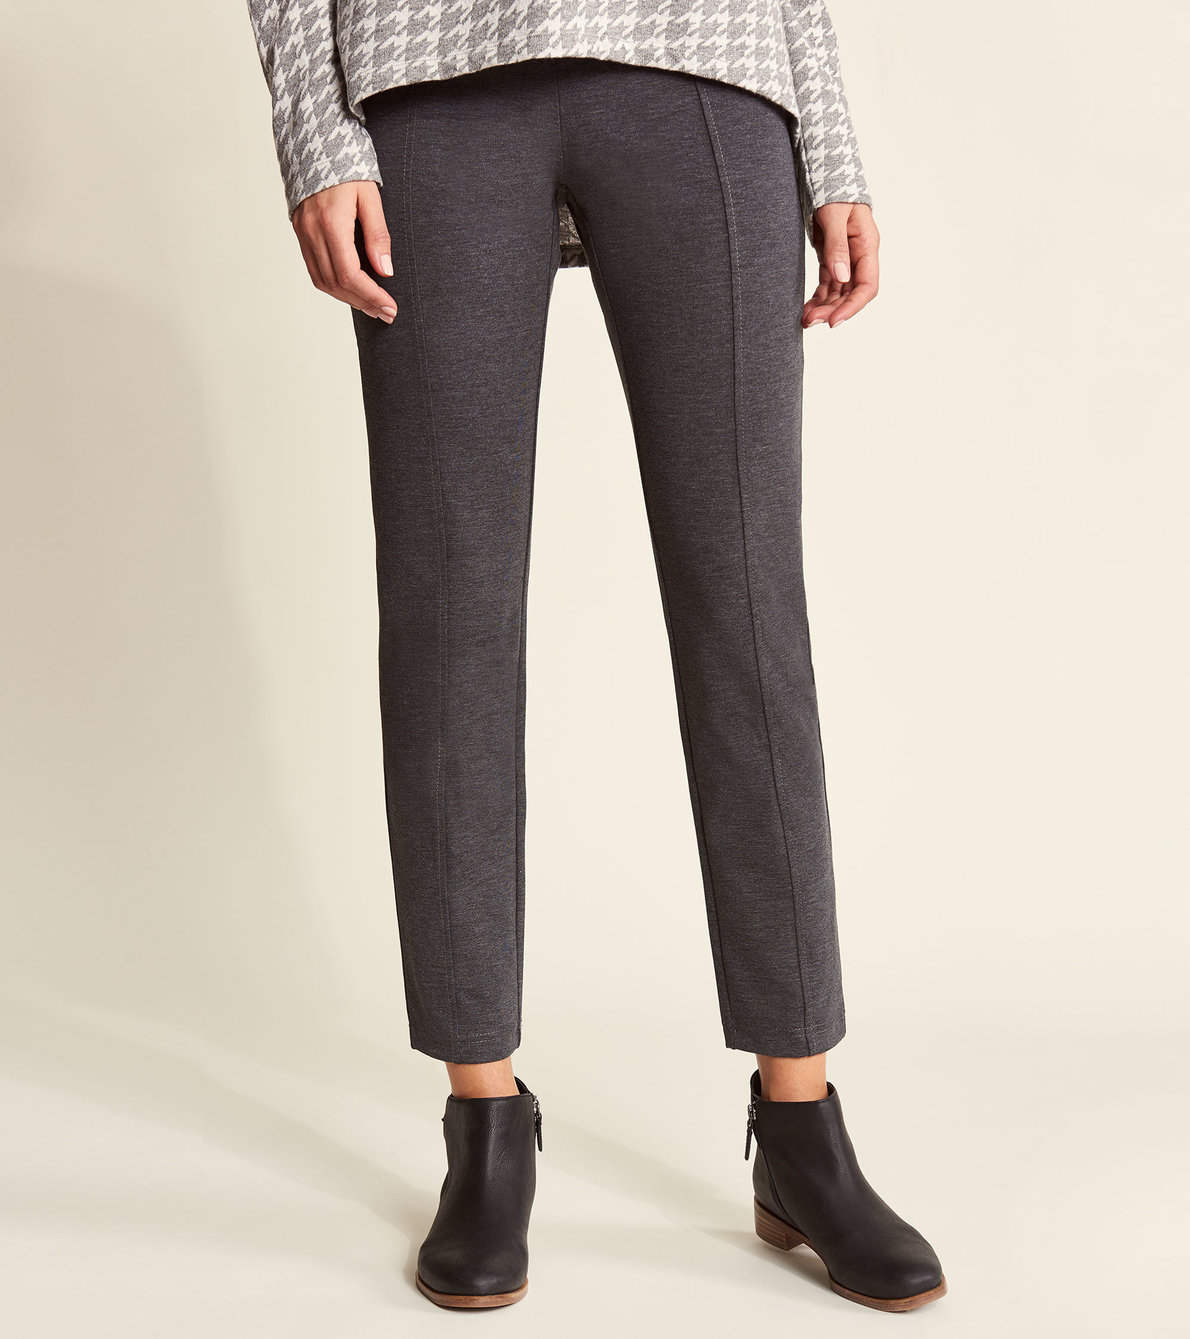 View larger image of Kate Ponte Trousers - Charcoal